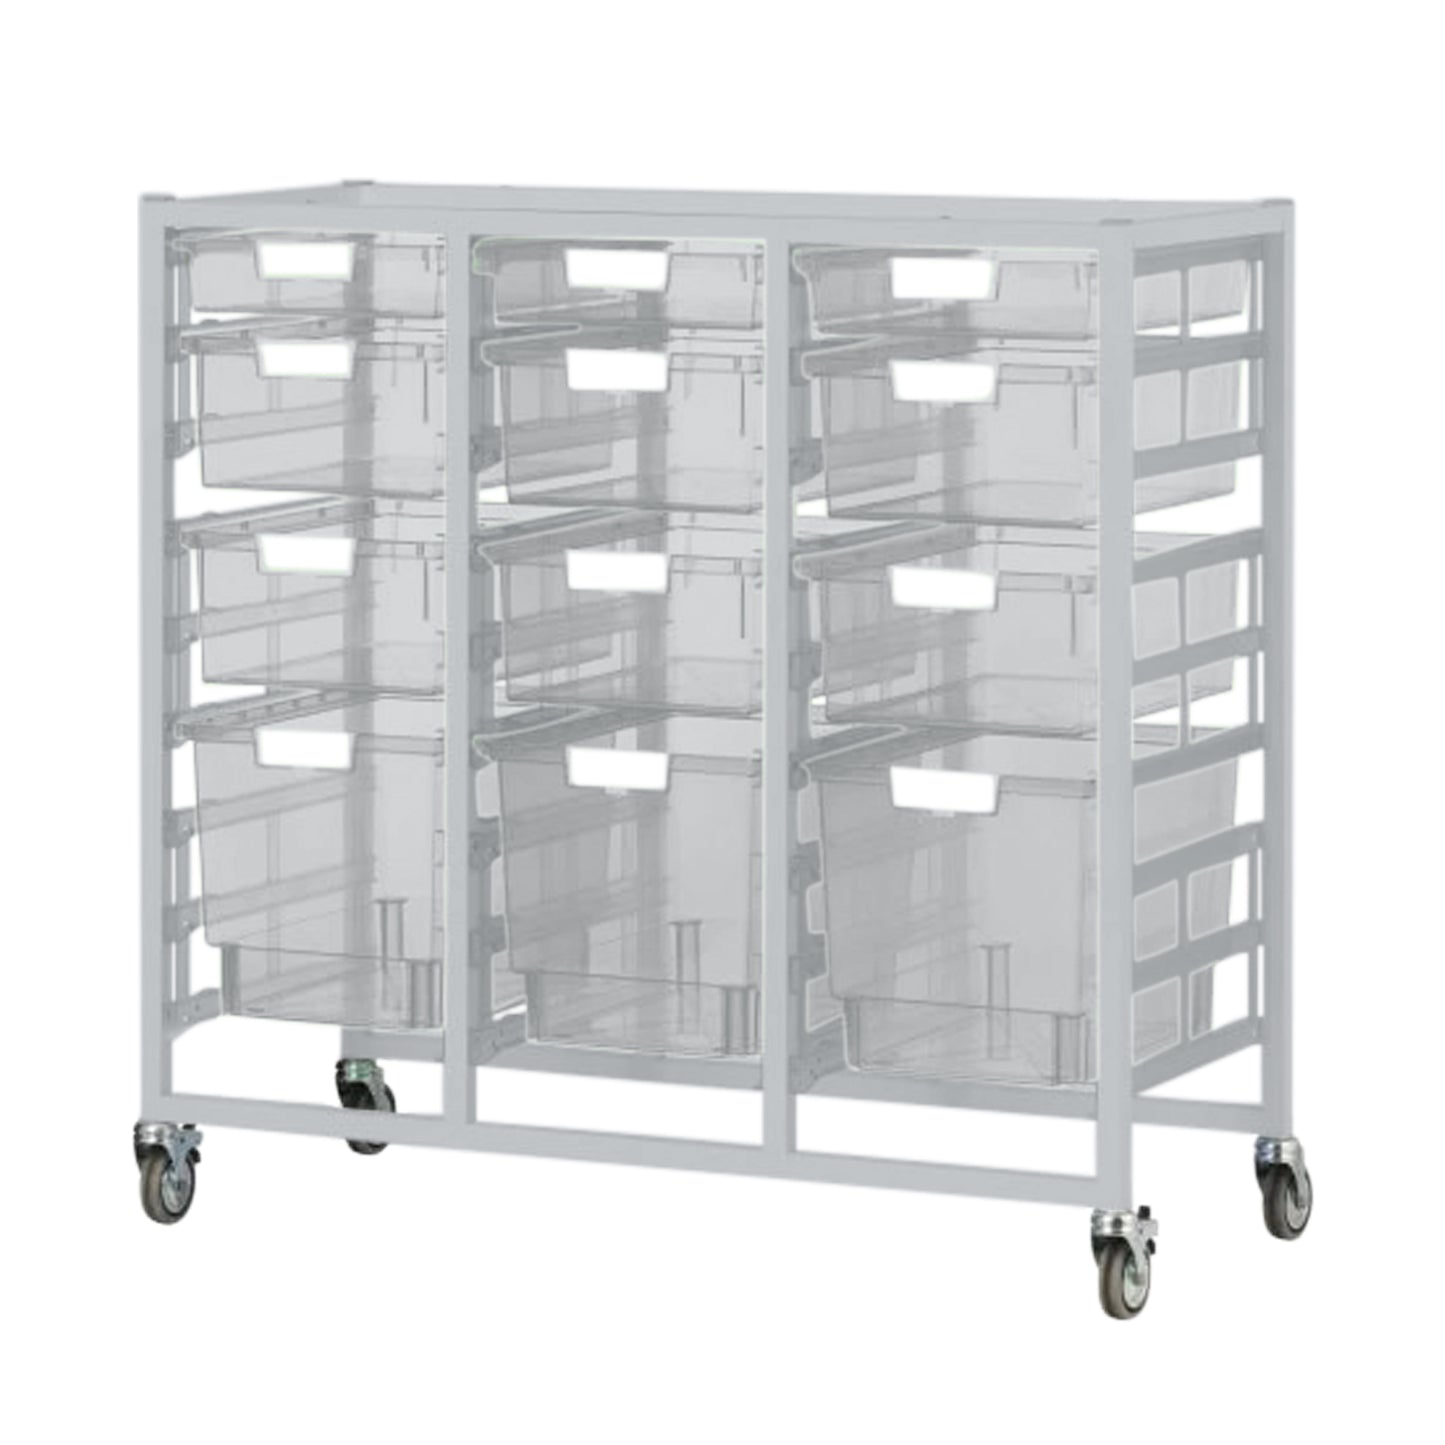 Certwood Class Act Tower - Slim Line - 27 Module - Mobile Storage Cart  (CRT-CE2103)